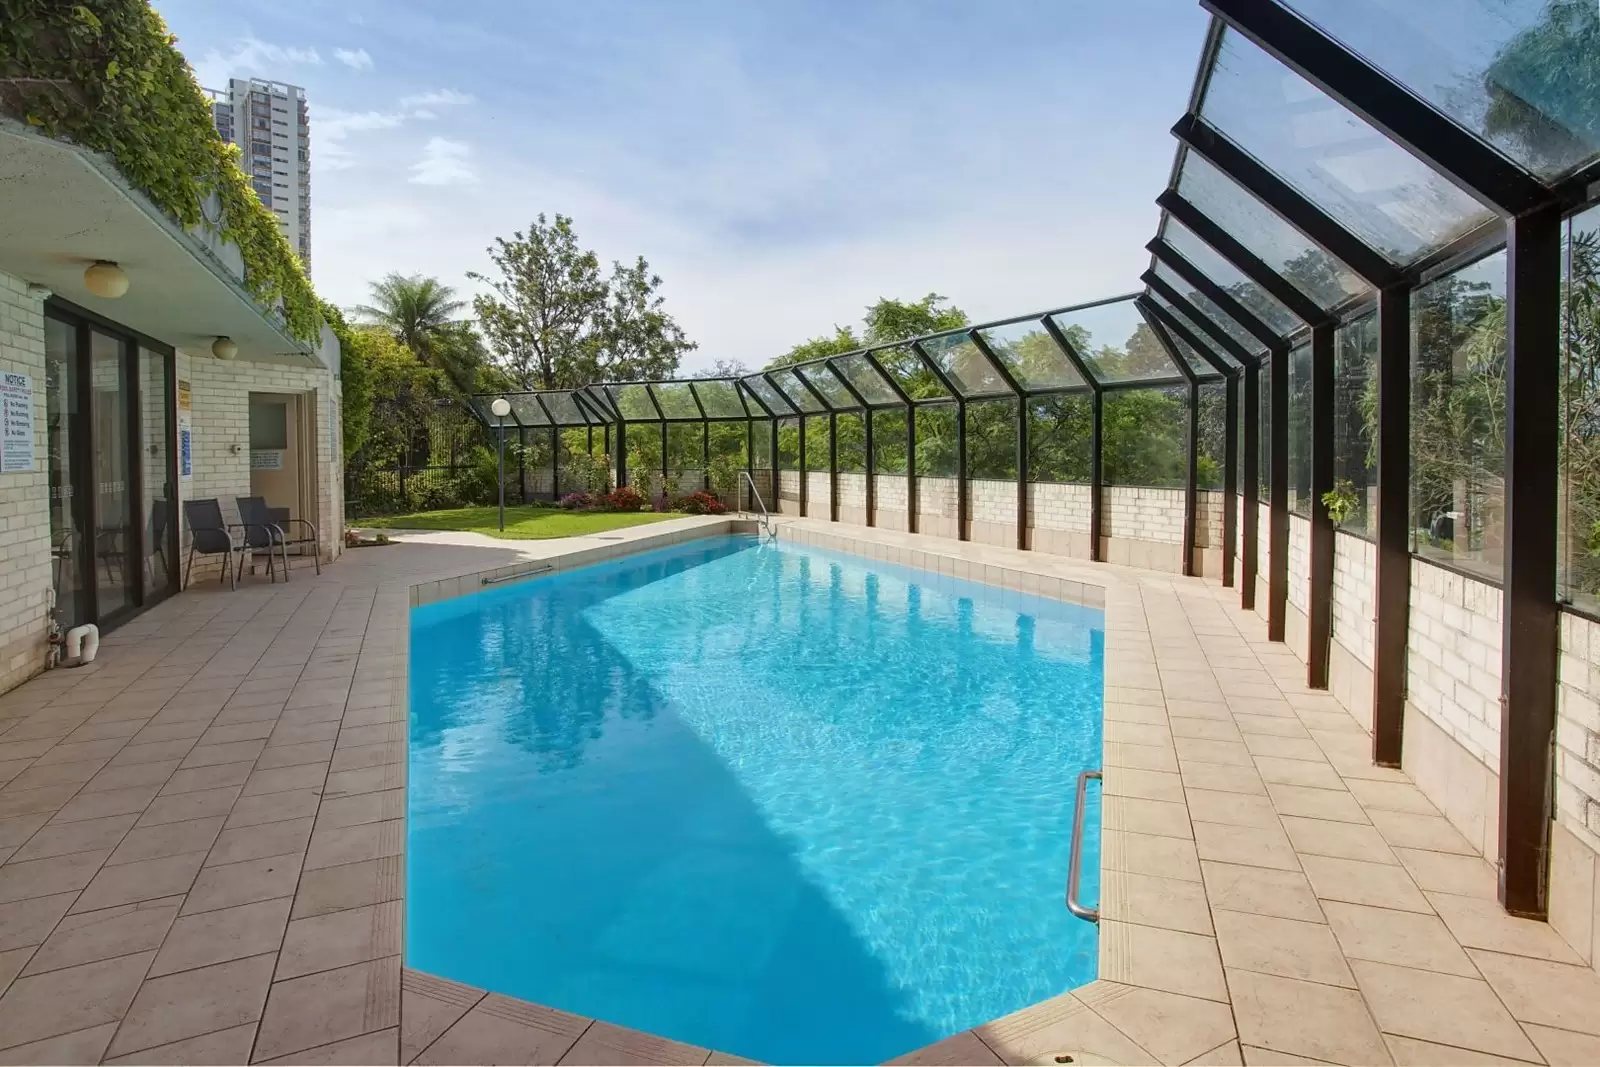 Photo #5: 1801/180 Ocean Street, Edgecliff - Sold by Sydney Sotheby's International Realty